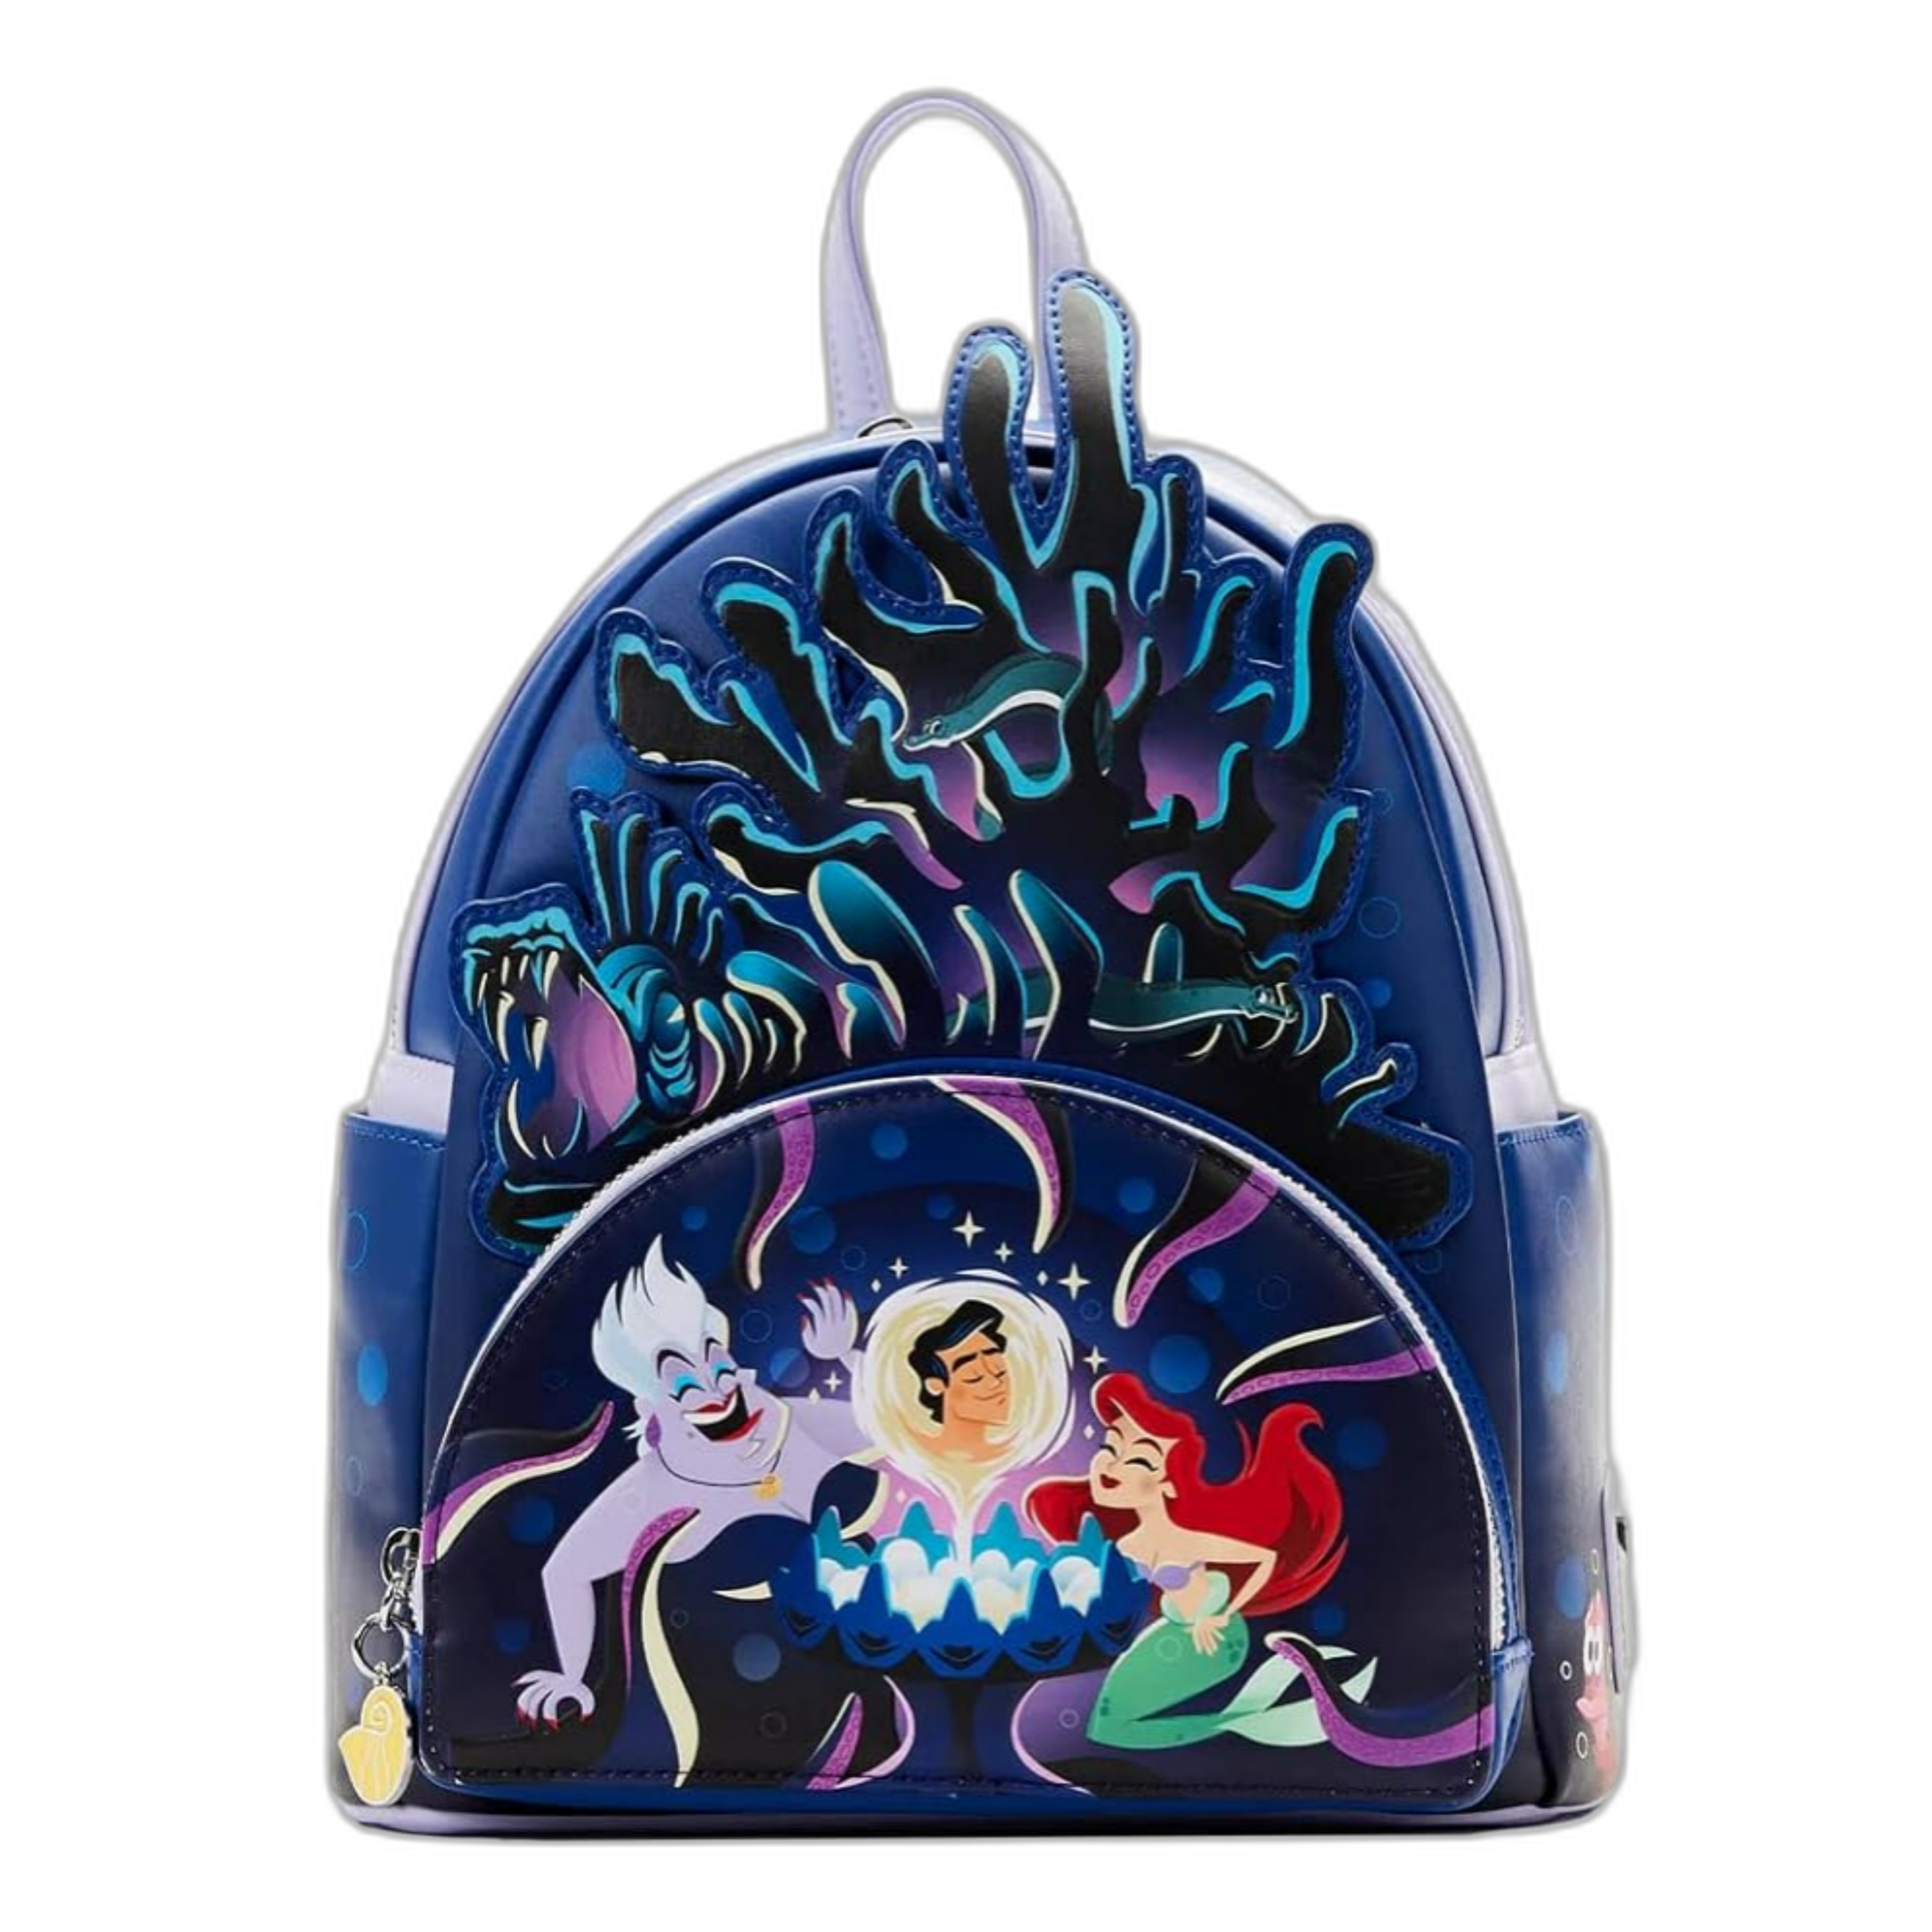 Loungefly Ursula's Lair Backpack inspired by the Disney movie. 